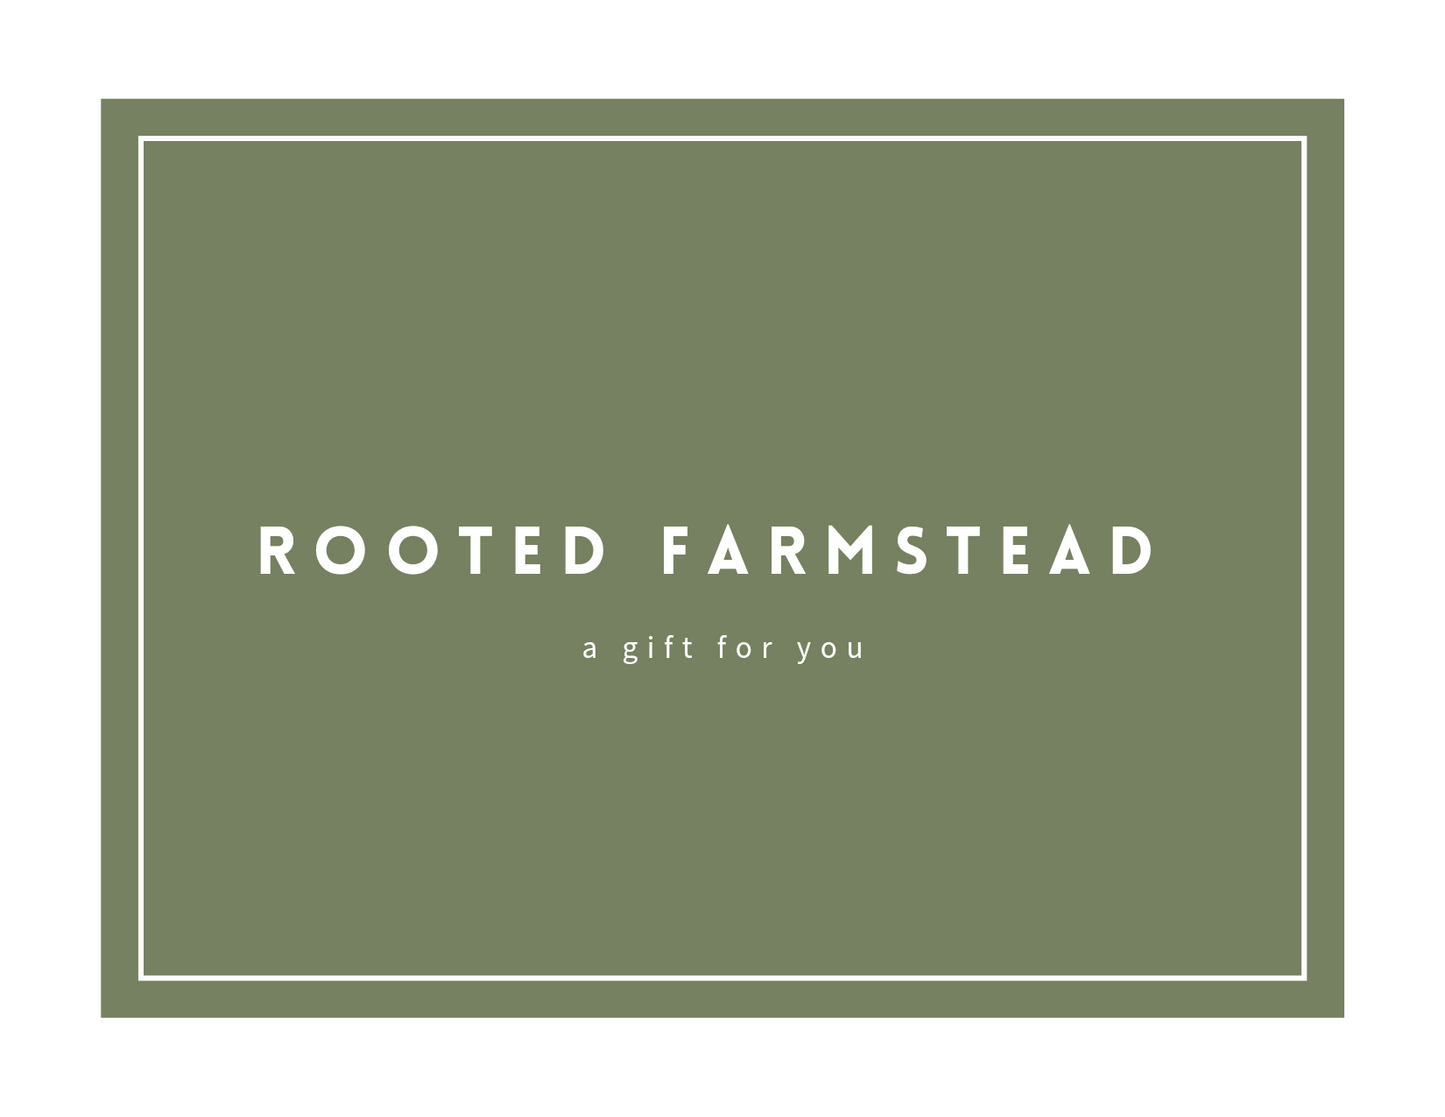 Rooted Farmstead Digital Gift Card